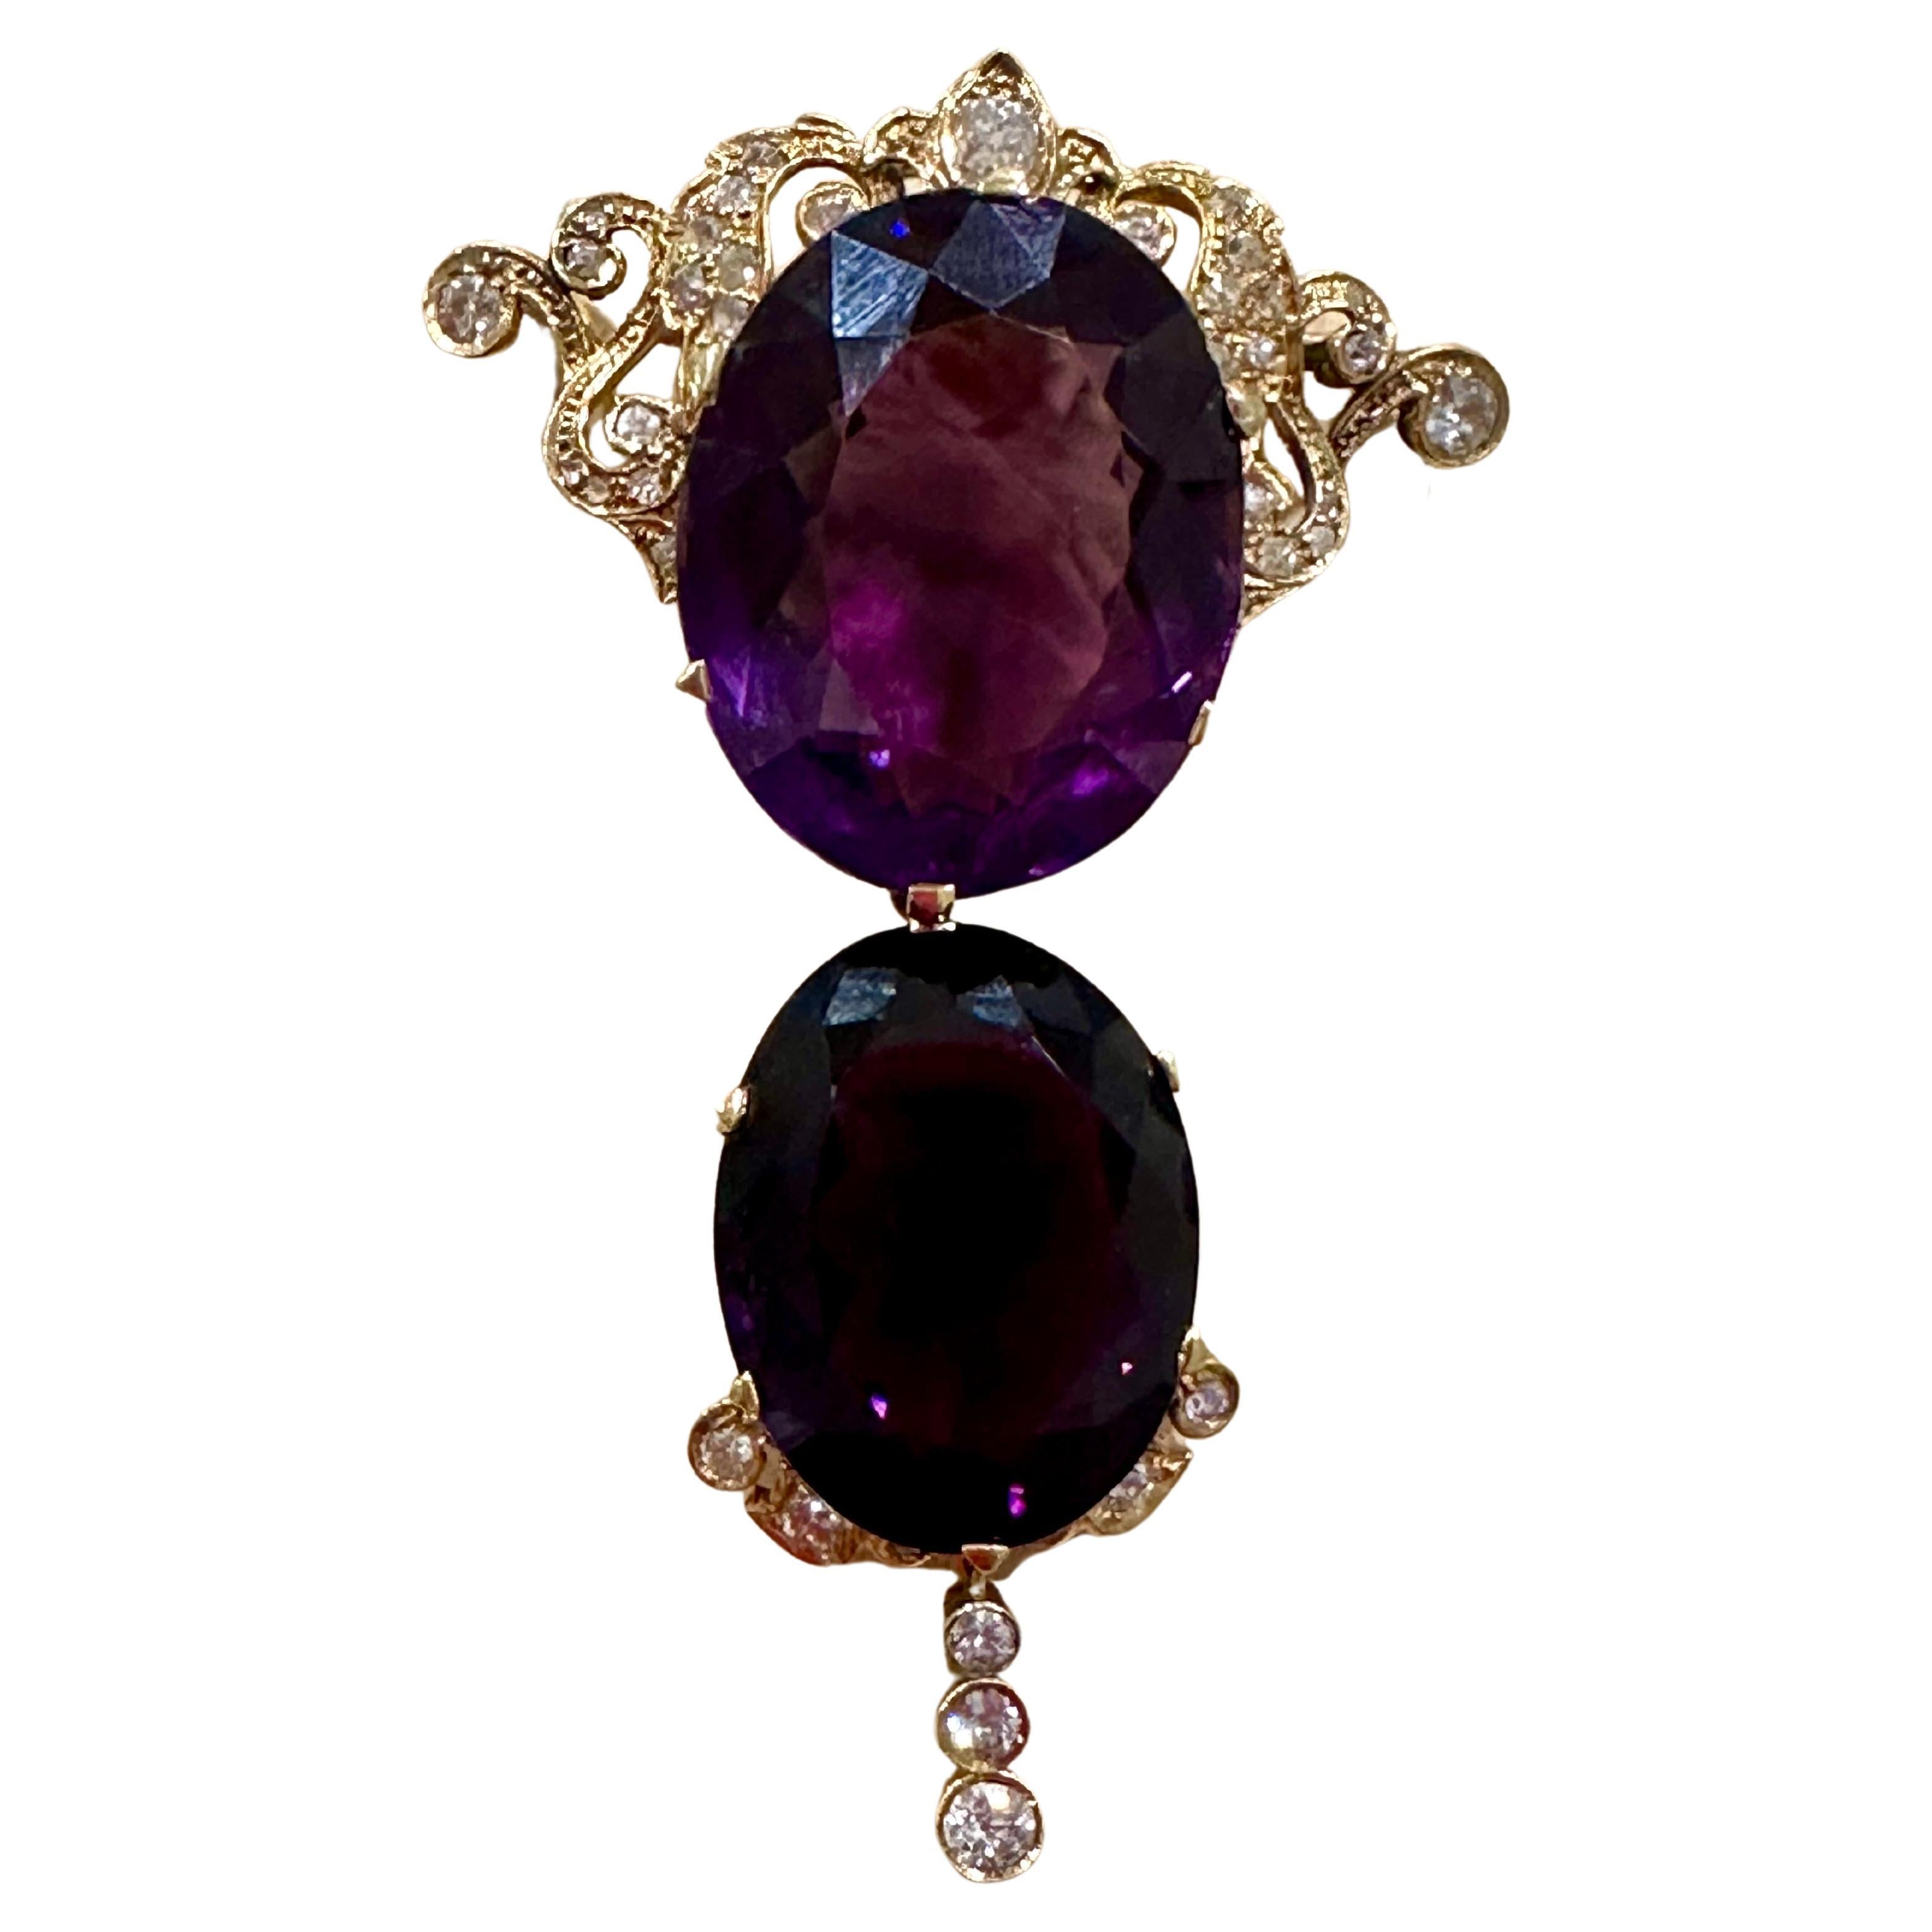 This spectacular pendant necklace/pin consists of two large perfect pear-shaped amethysts, totaling approximately 70 carats. The amethysts are set in a gold frame with diamonds, adding to its elegance and beauty. This is a vintage piece with